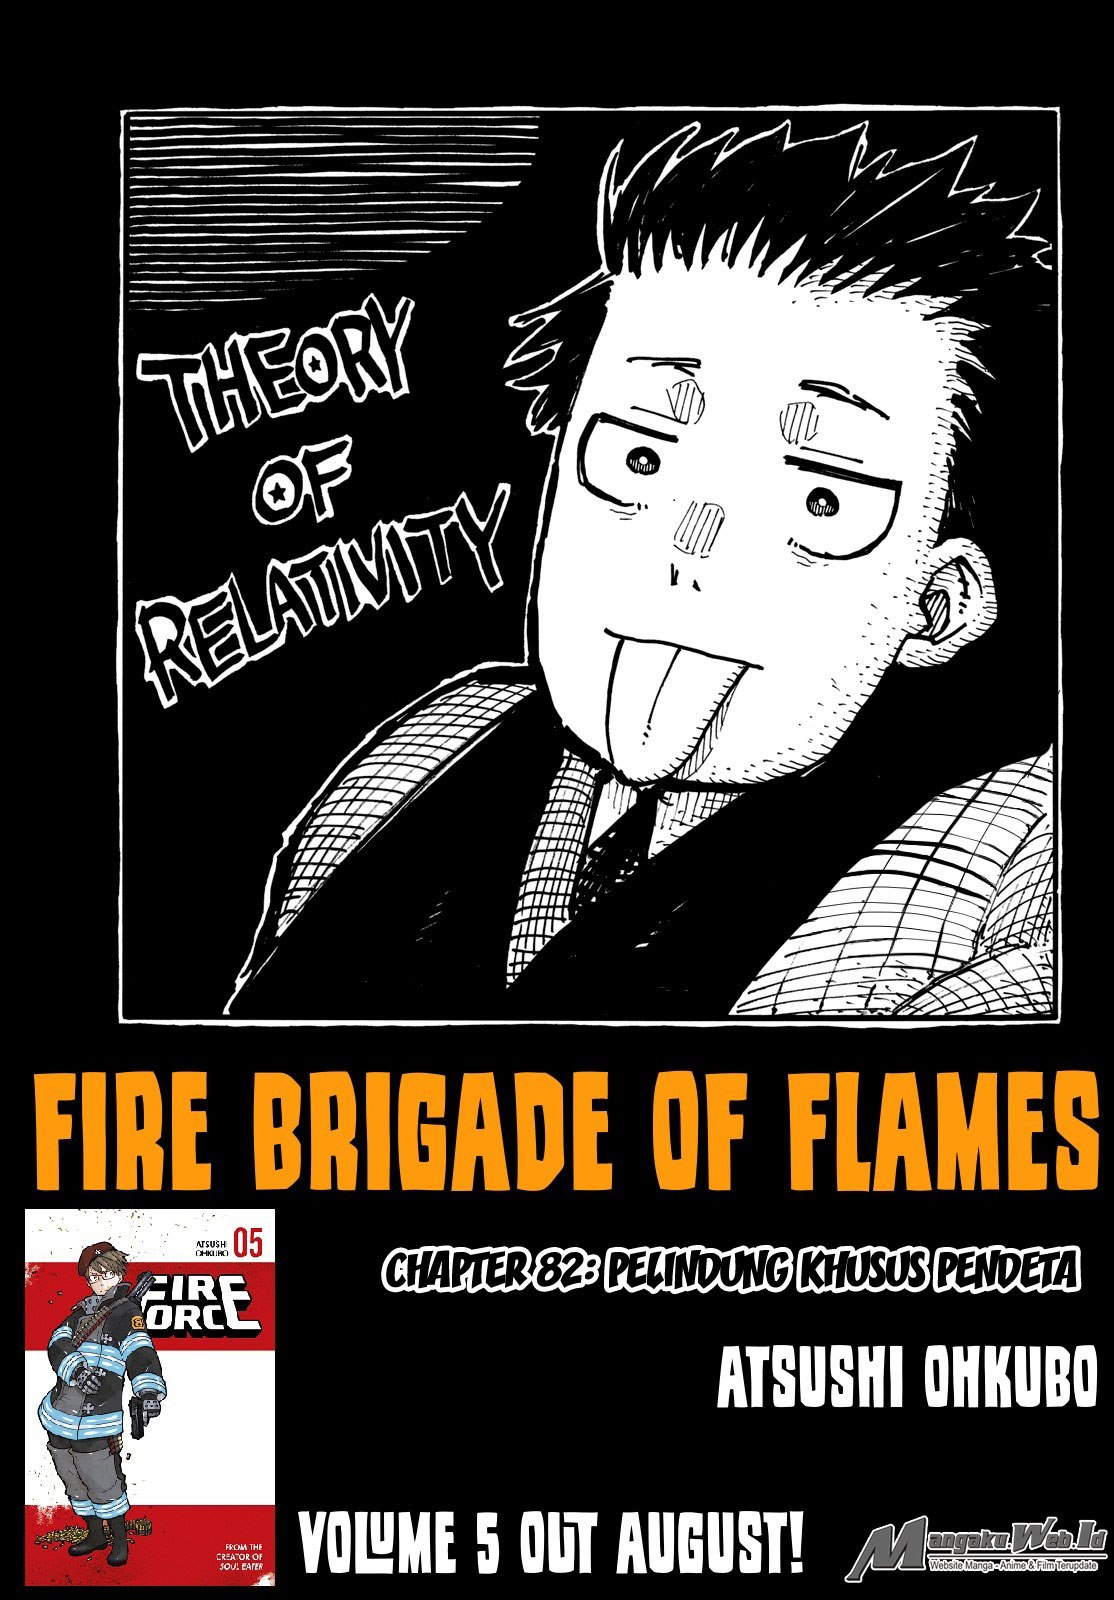 Fire Brigade of Flames Chapter 82